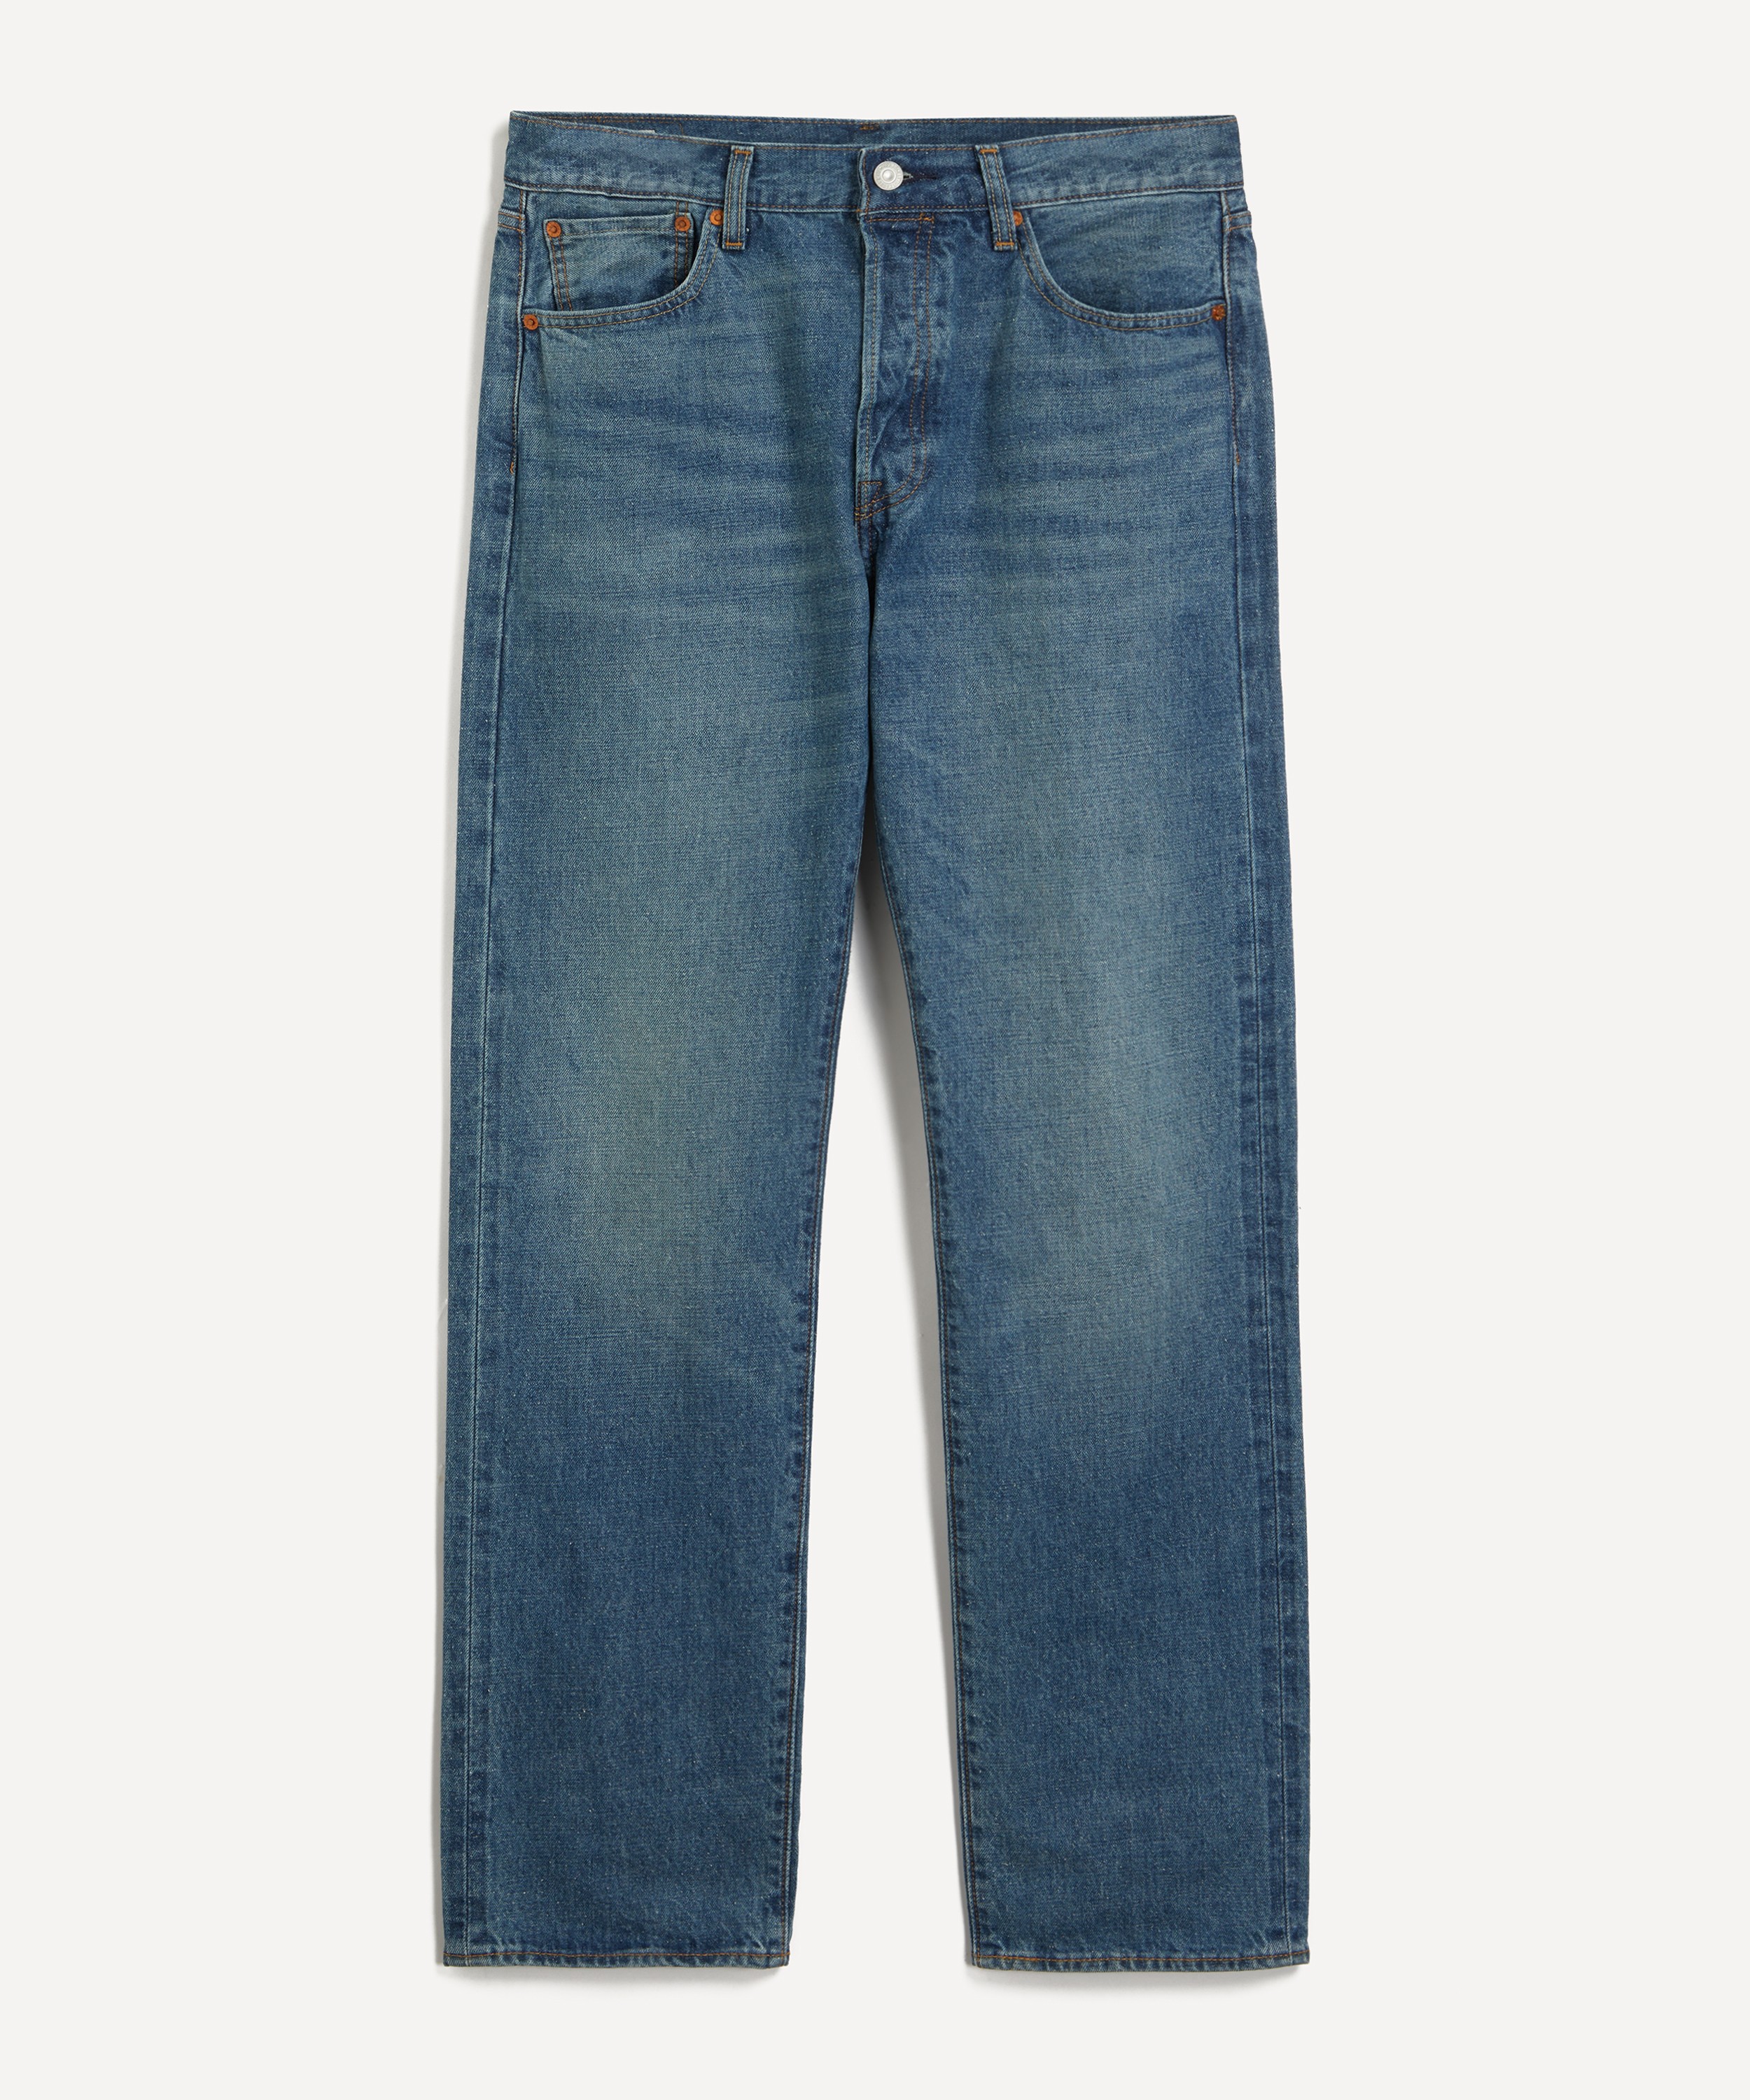 Levi's Made & Crafted - 501® Original Selvedge Jeans image number 0